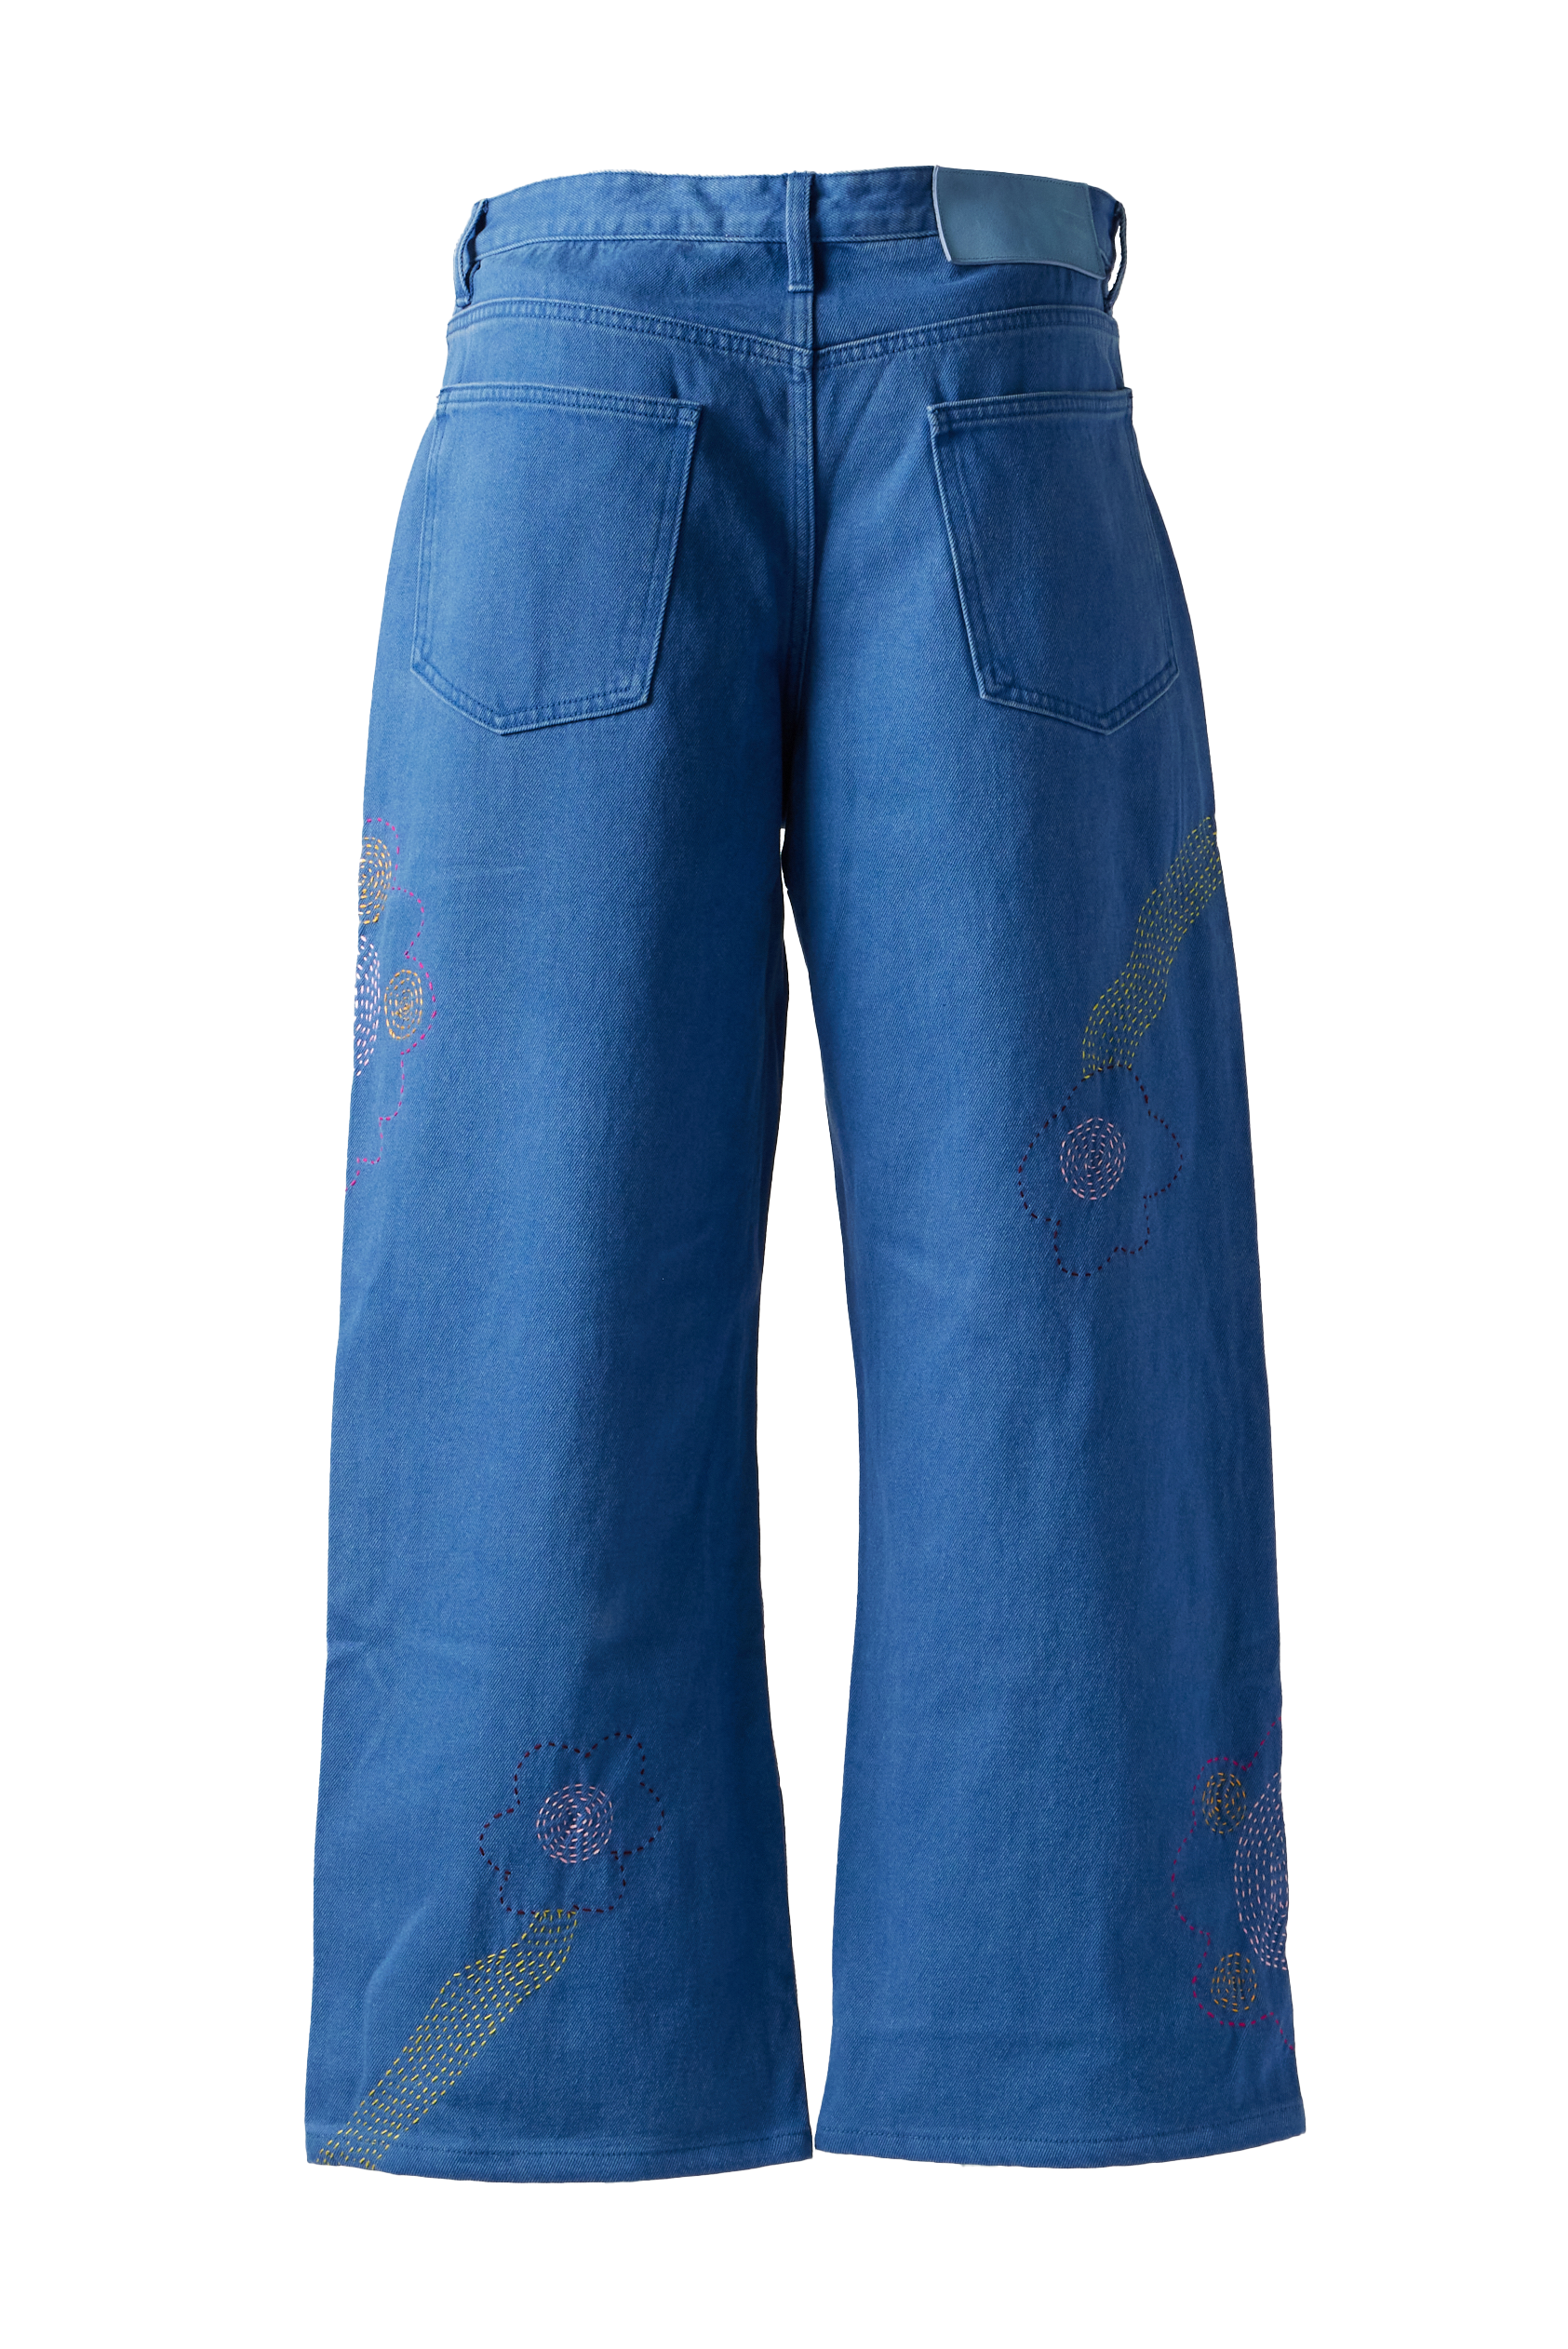 GLASS CYPRESS - Quilted Denim Jeans product image